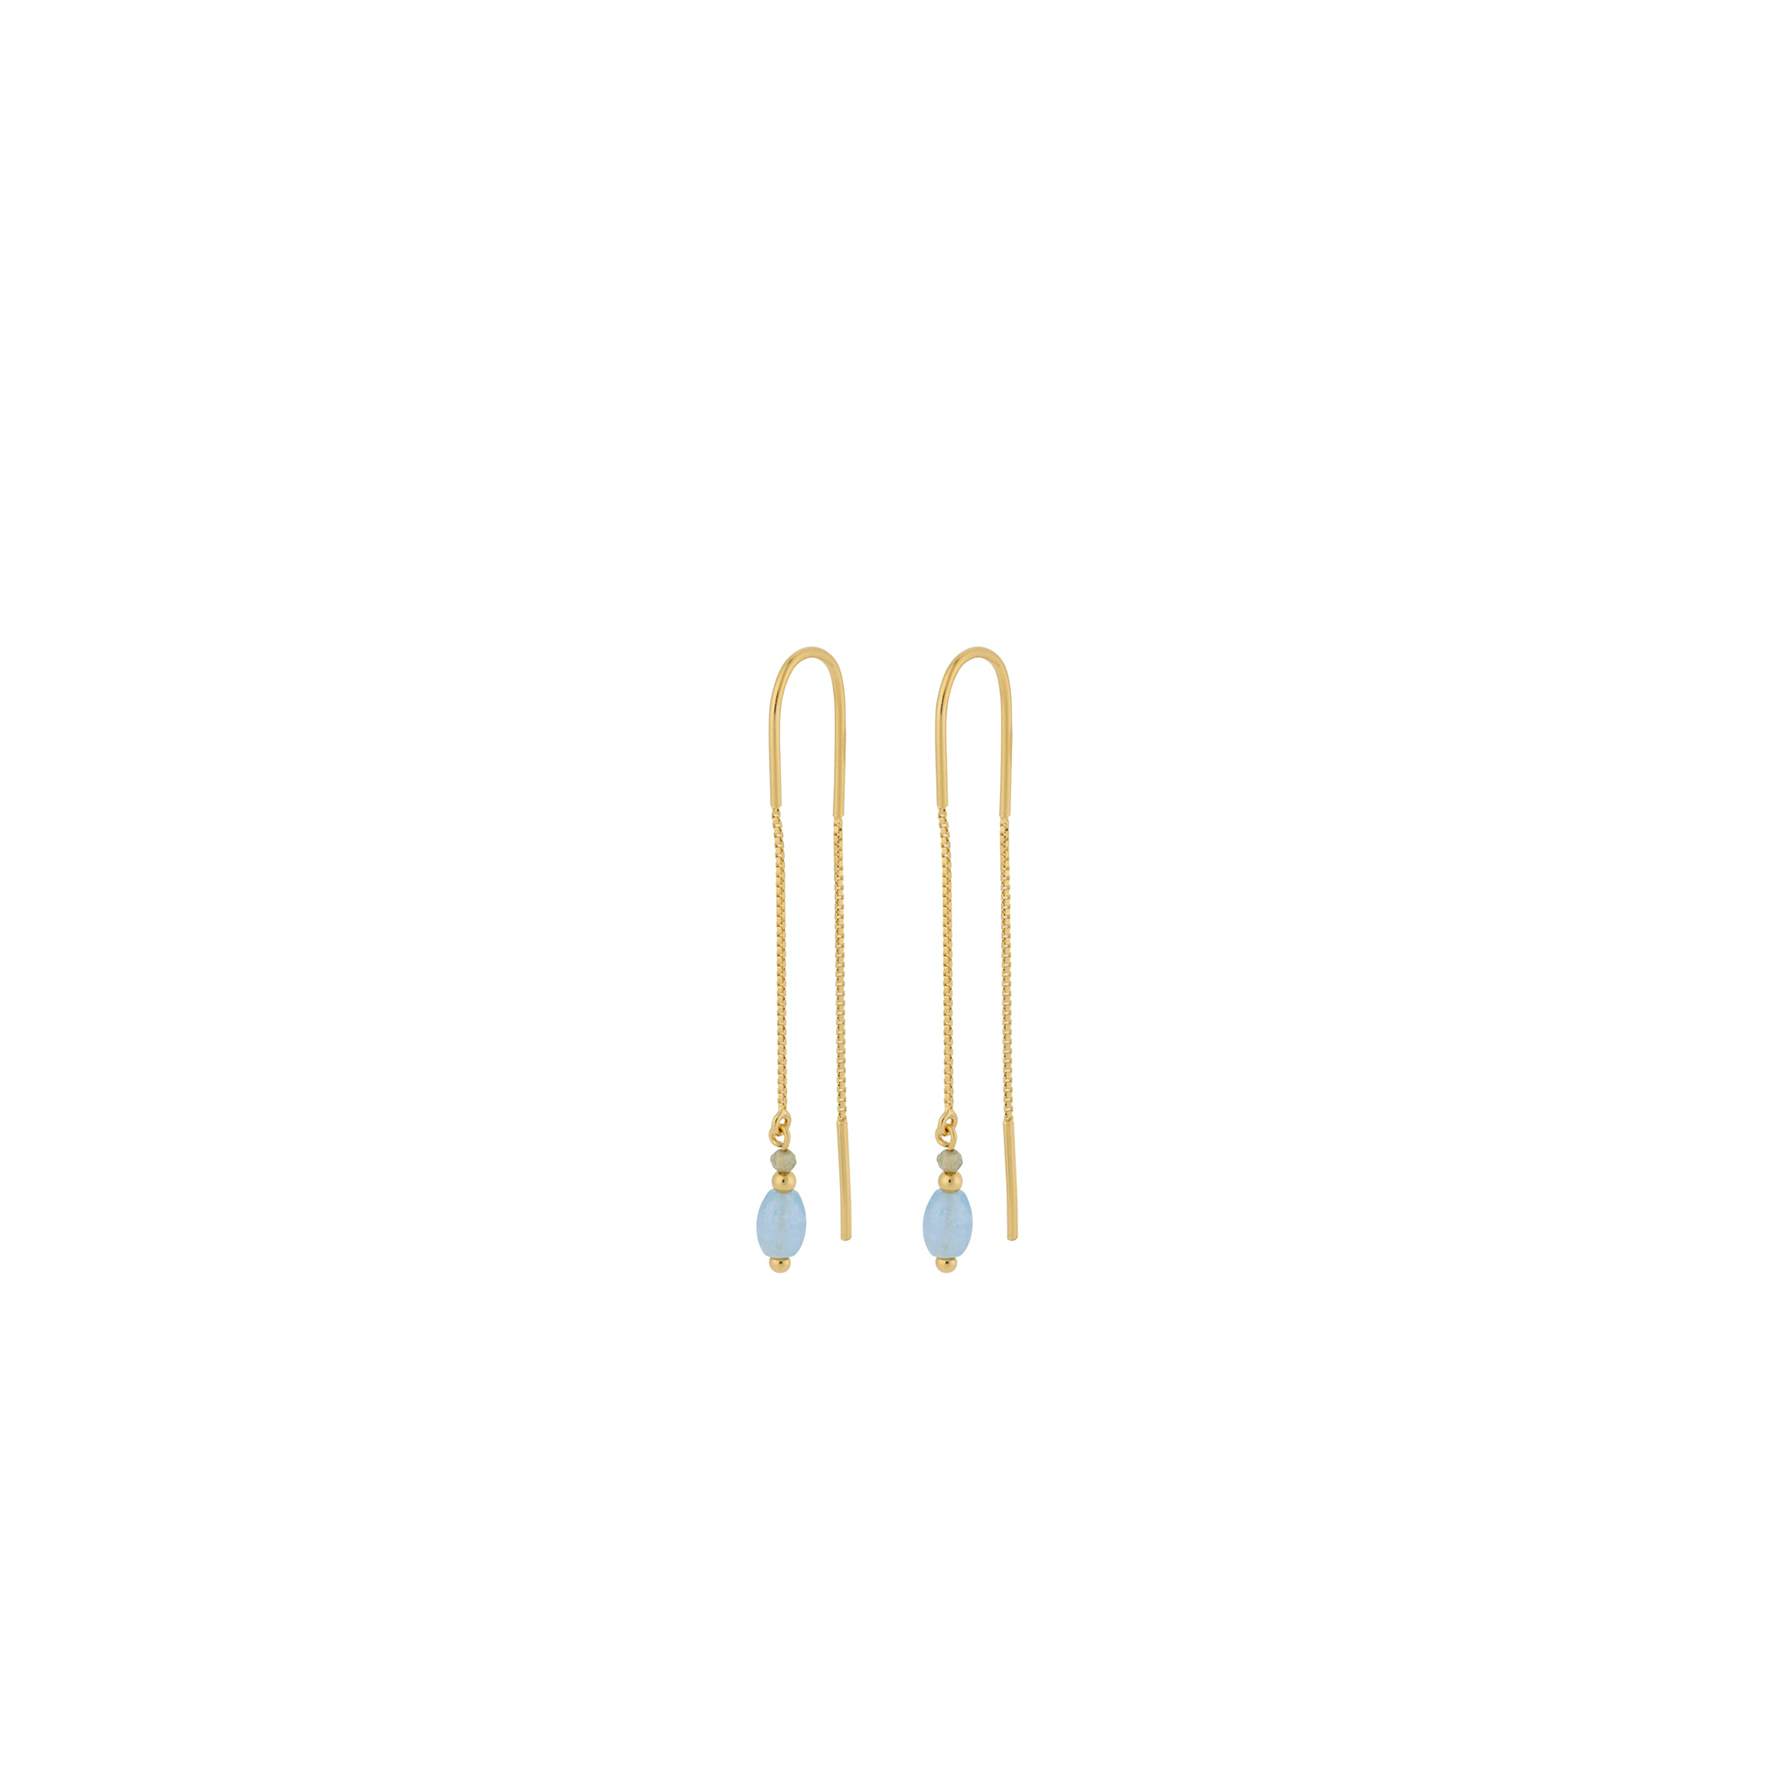 Horizon Earchains from Pernille Corydon in Goldplated-Silver Sterling 925